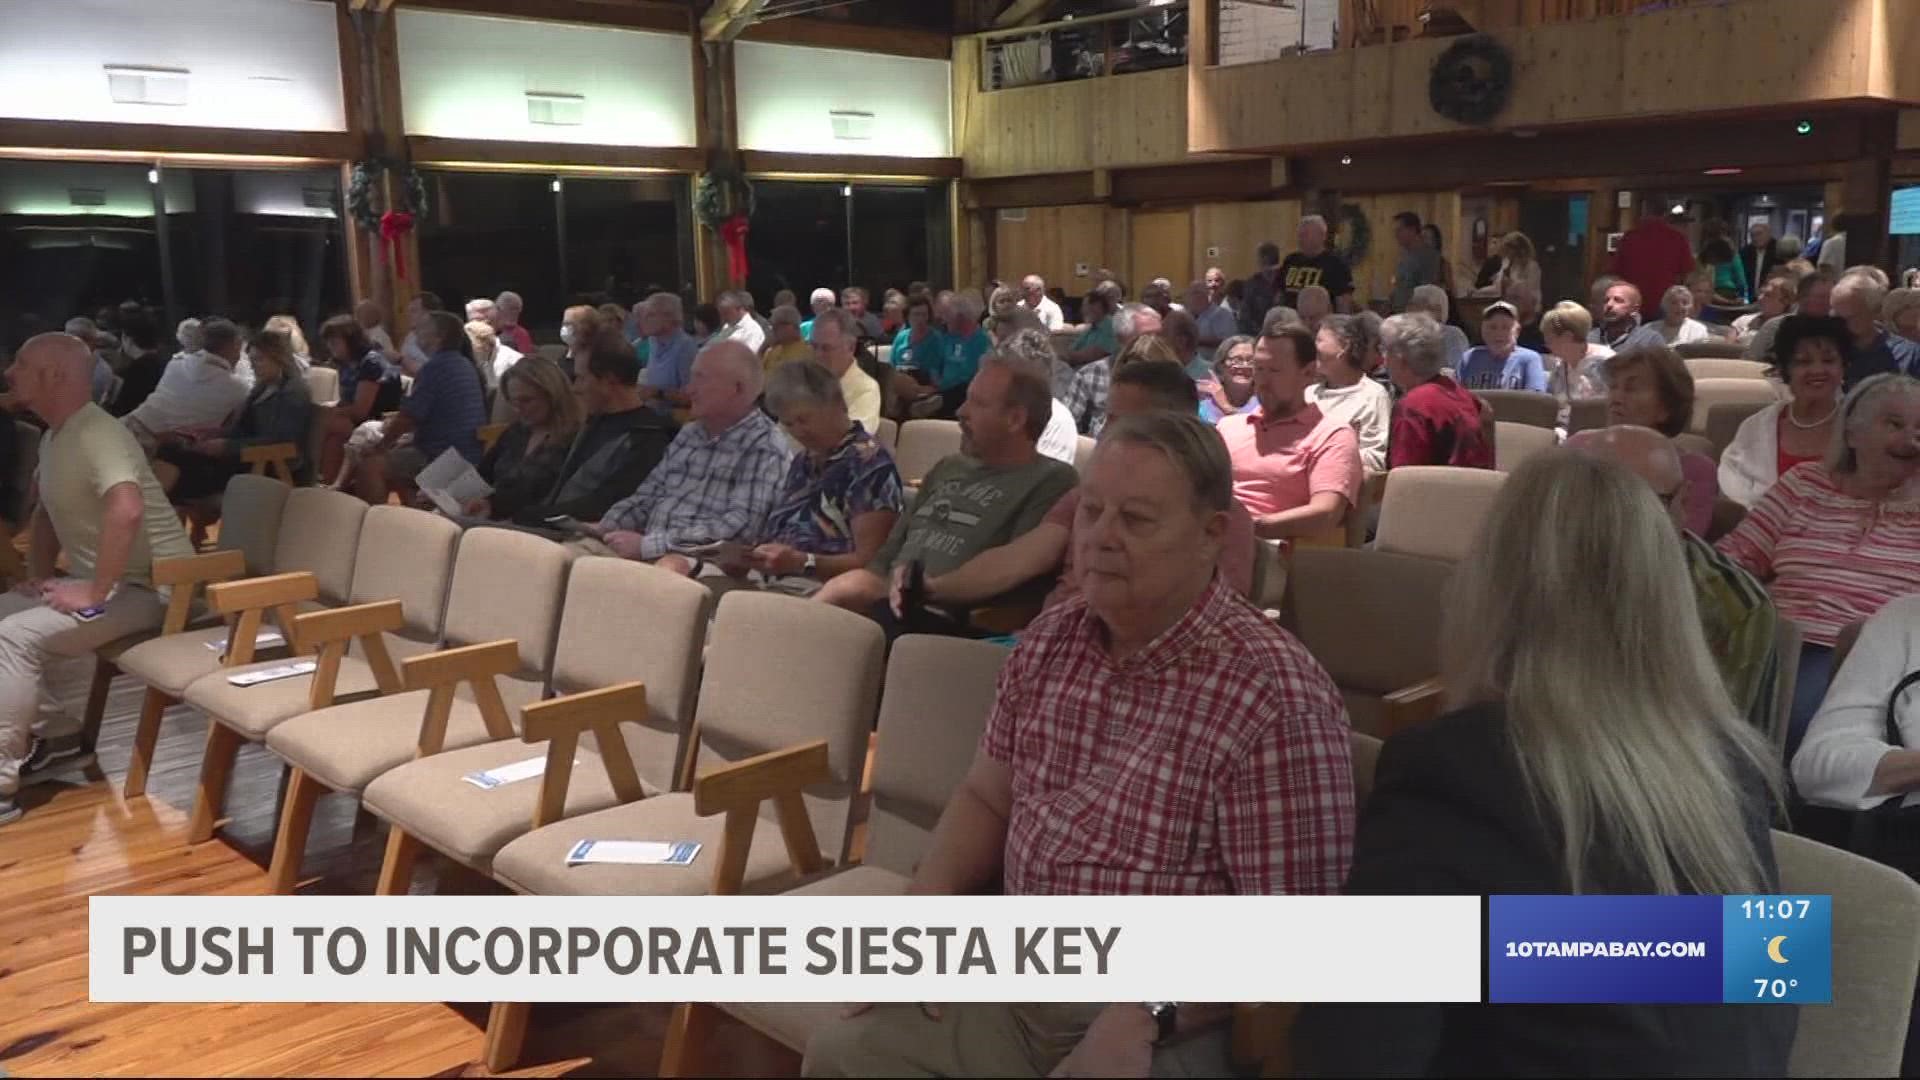 Save Siesta Key is waiting on straw ballot responses from residents in the next step to getting a new measure on the ballot.